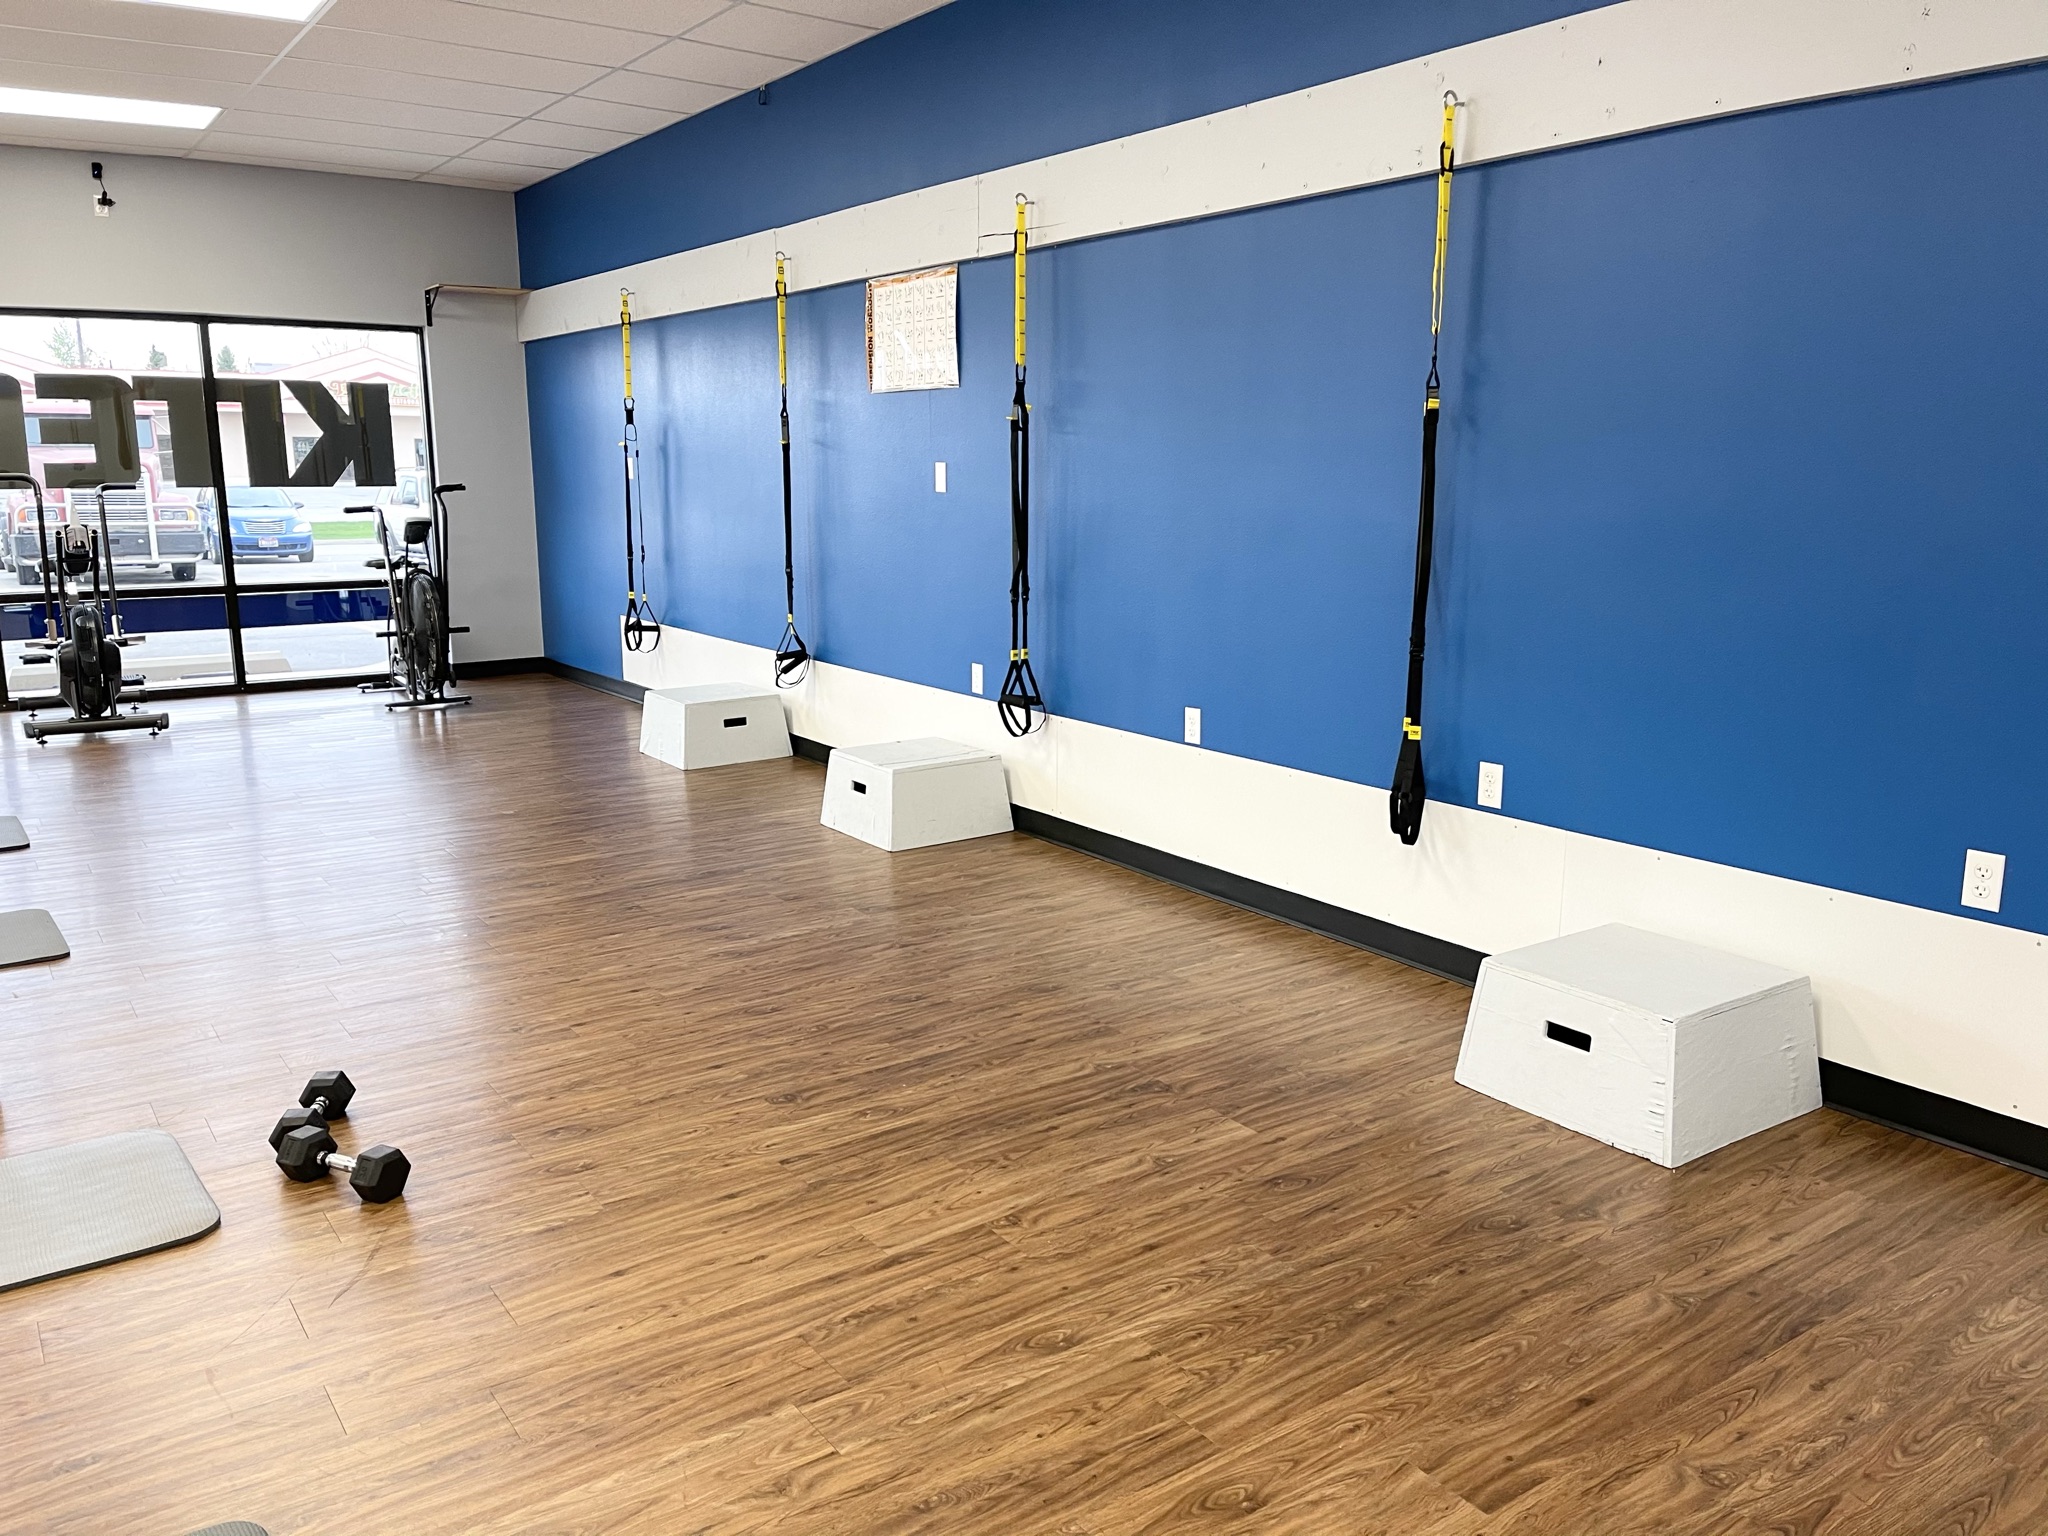 Post Falls group fitness gym interior after group fitness training class